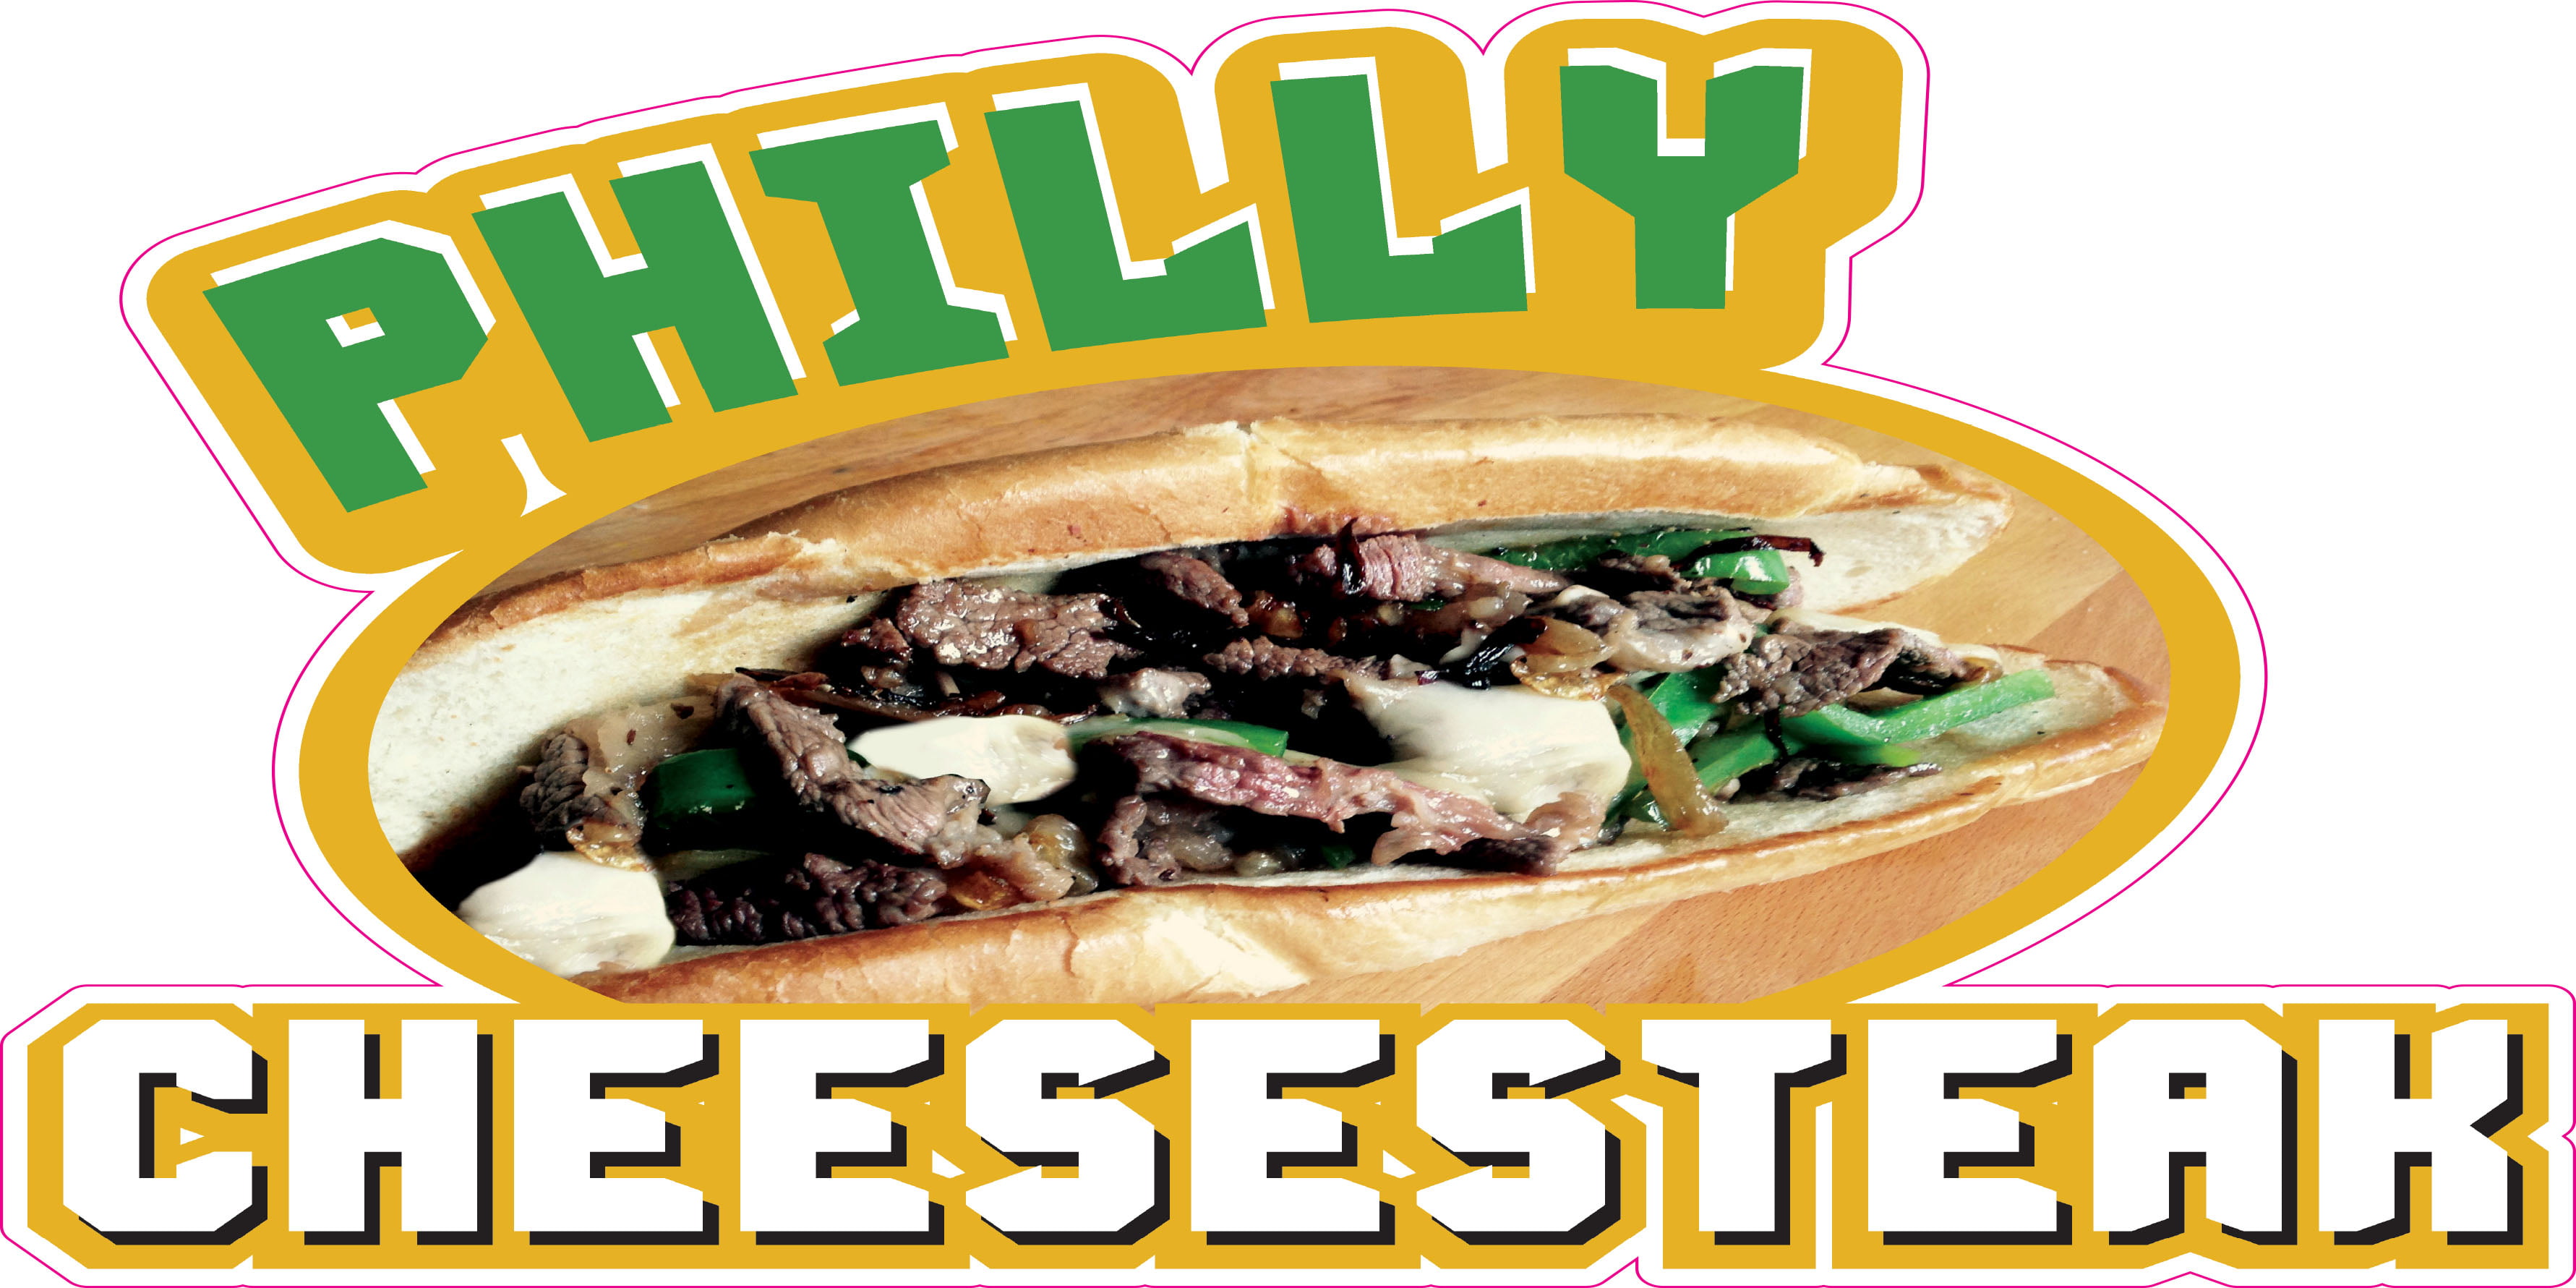 Philly Cheese Steak Decal 14" Sub Sandwich Concession Food Truck Sticker 